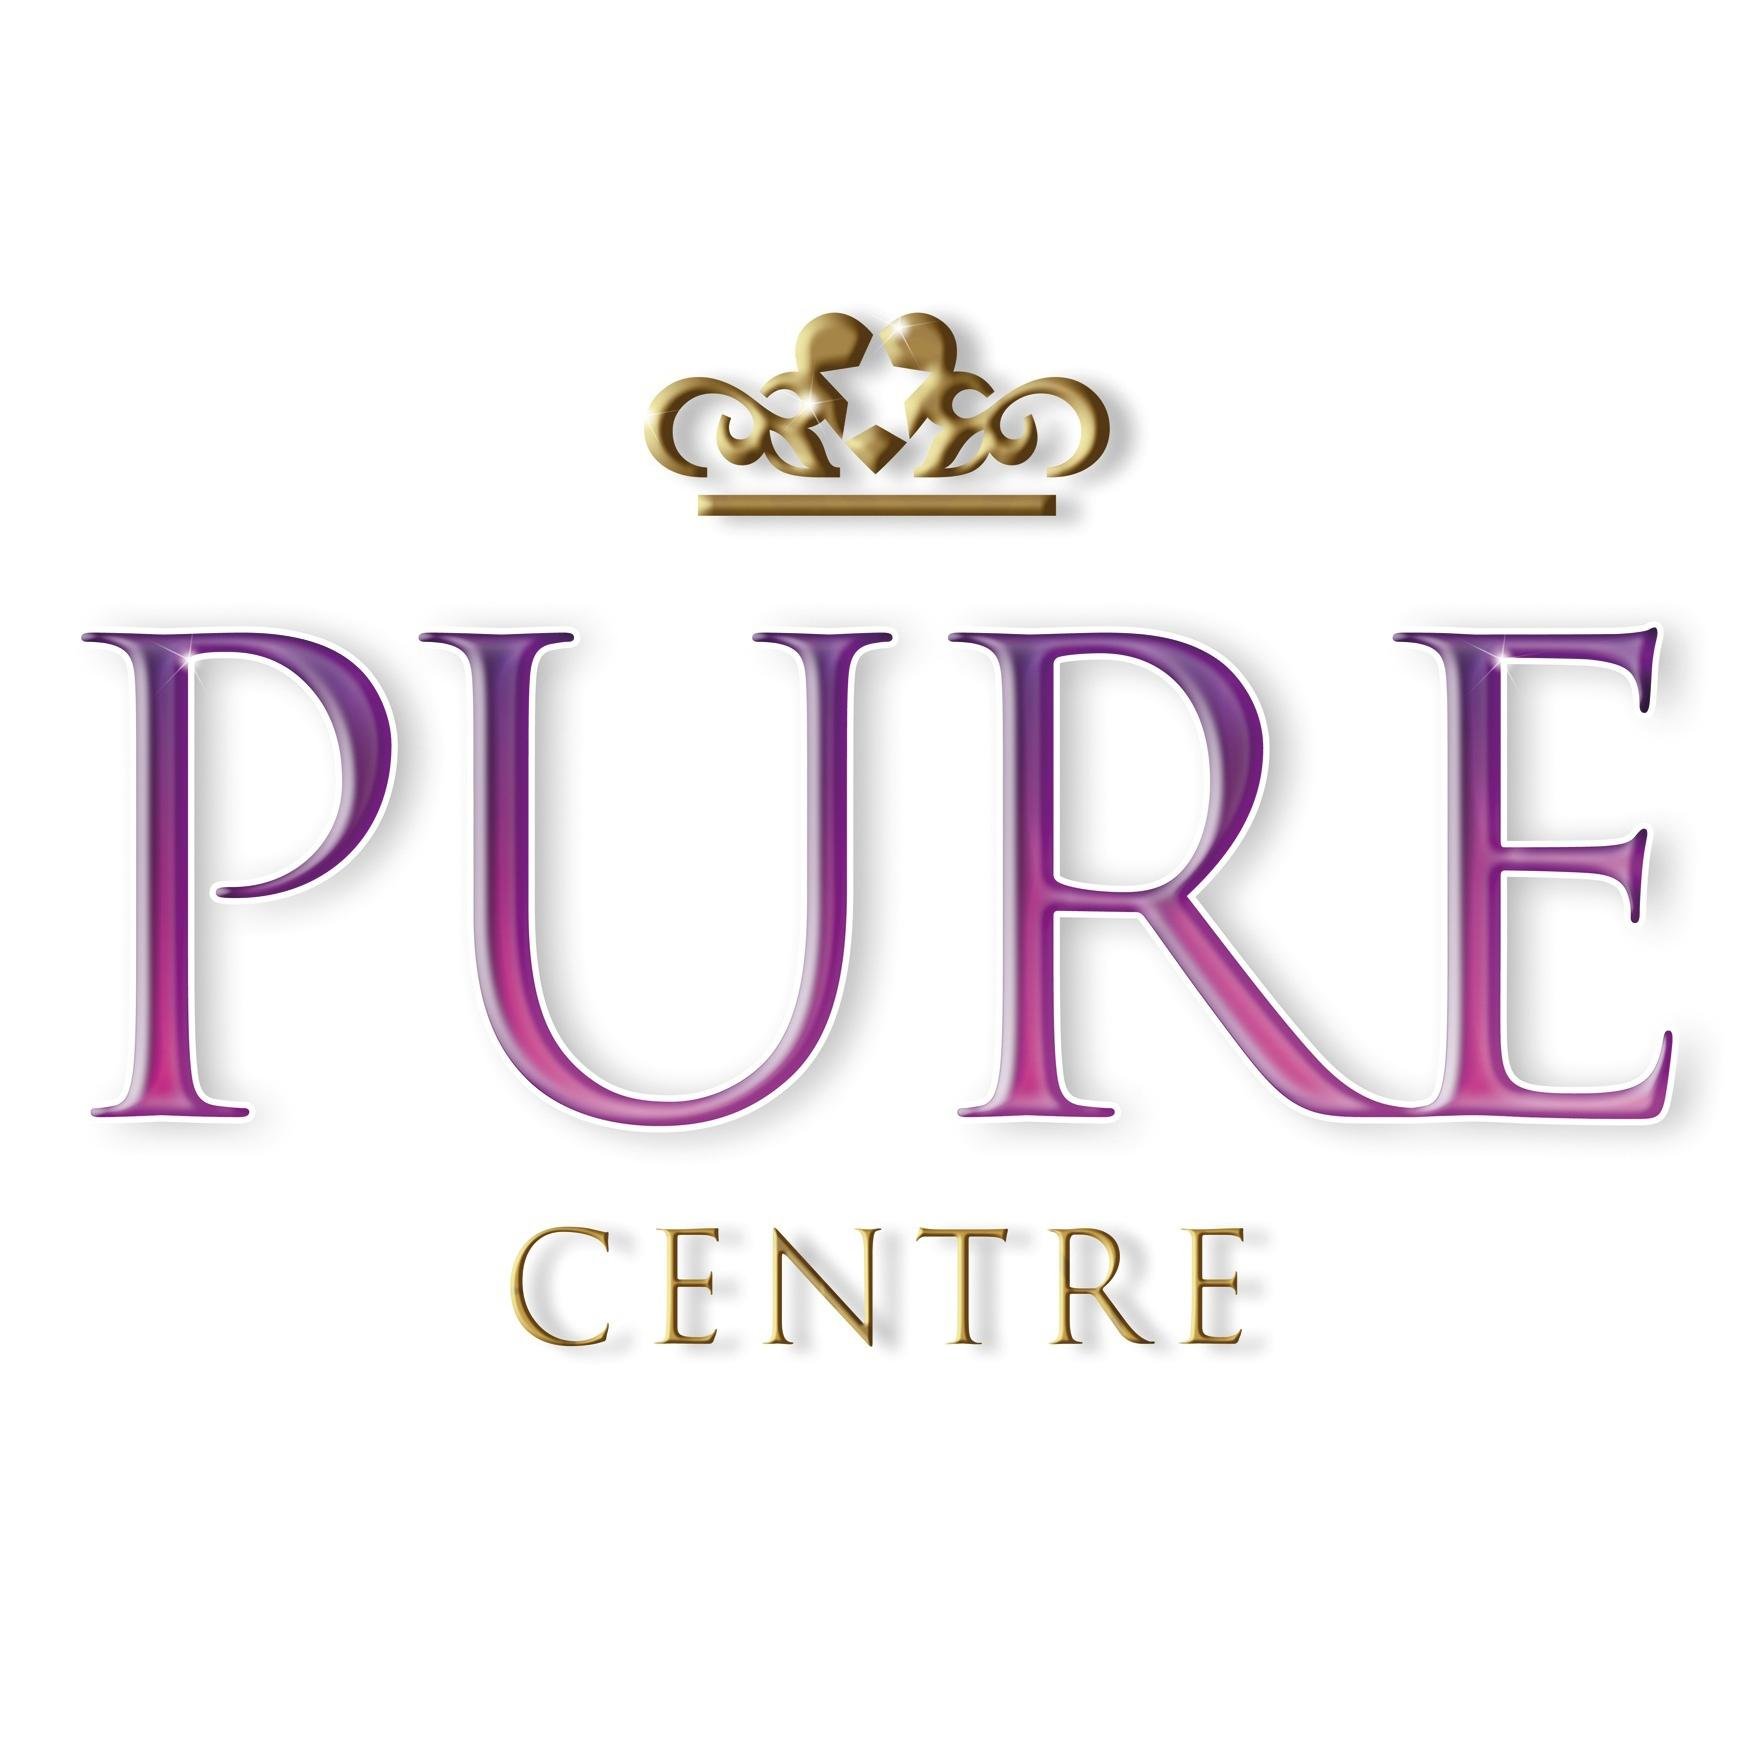 PURE Centre is a centre for #spiritualguidance by the #lawsoftheUniverse and #quantumregressionsessions. #Healing from #pastcreations by #forgiveness❤️⭐️